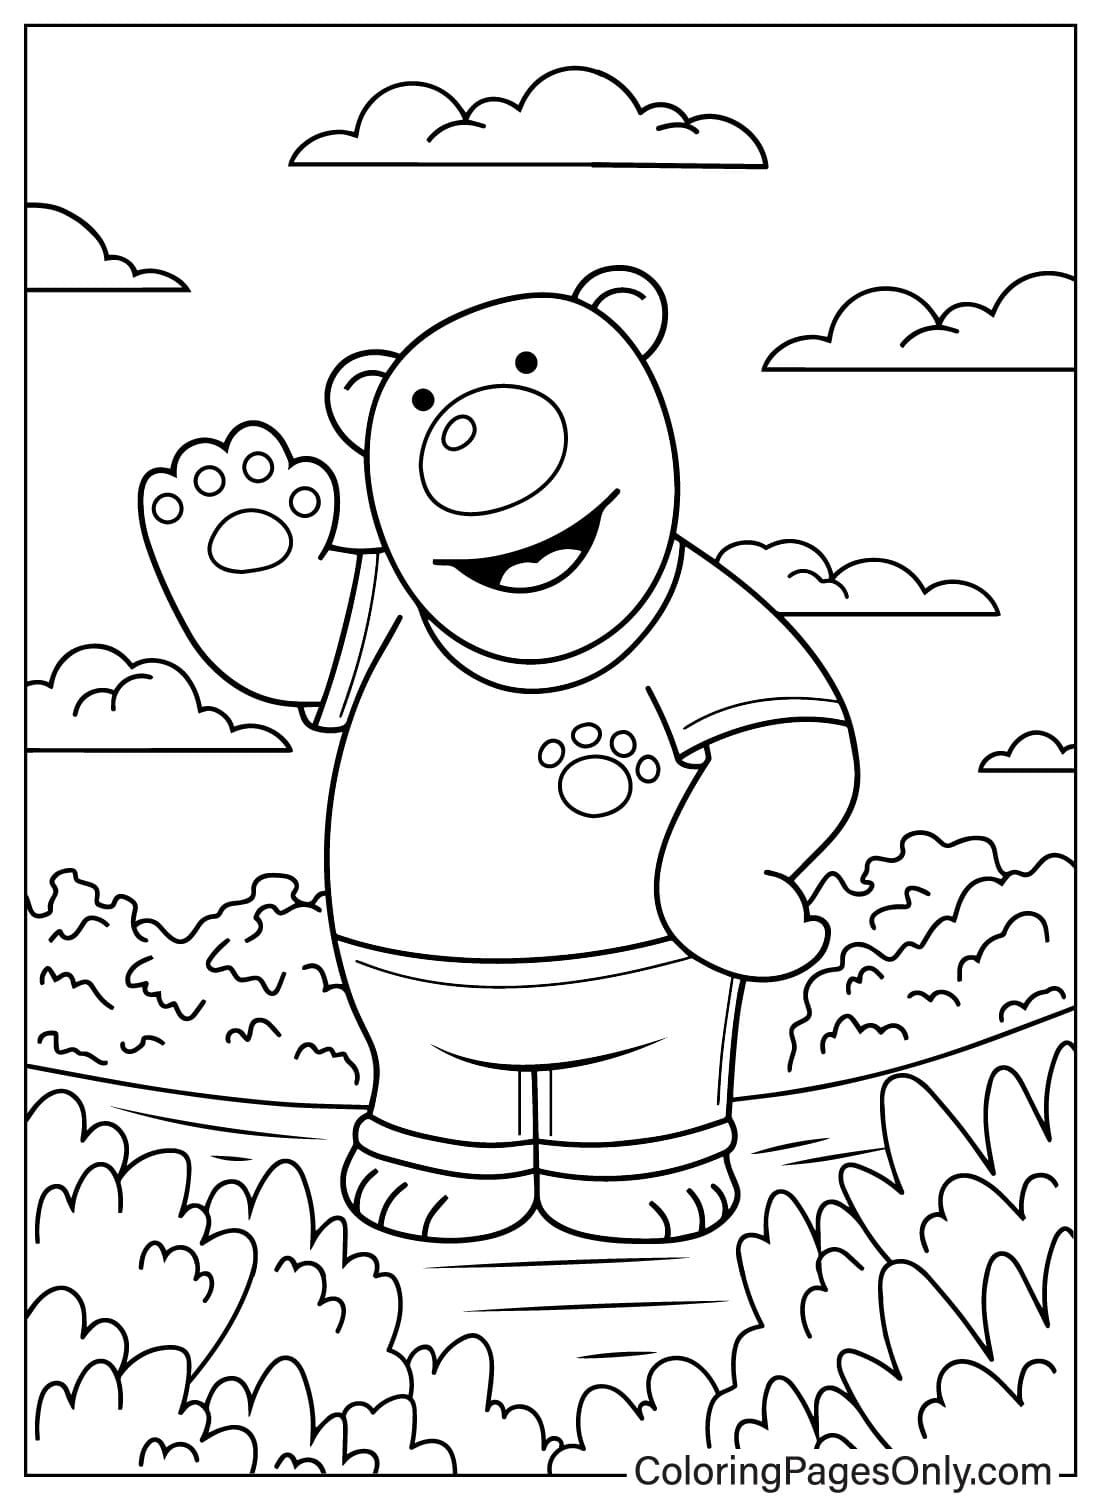 Poby Coloring Page from Pororo the Little Penguin